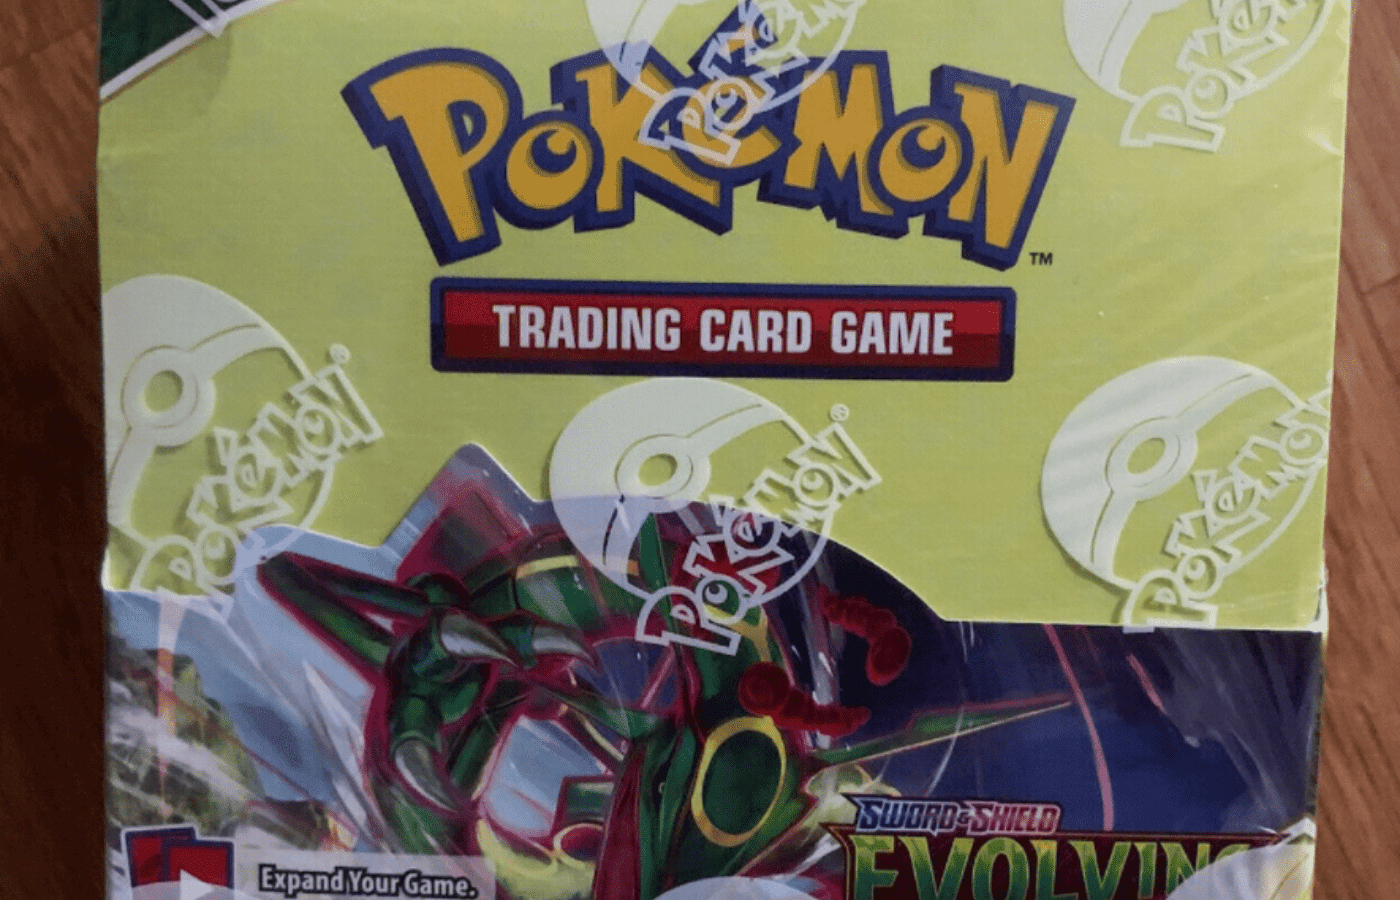 Is It Safe to Buy Pokemon Cards From Amazon.